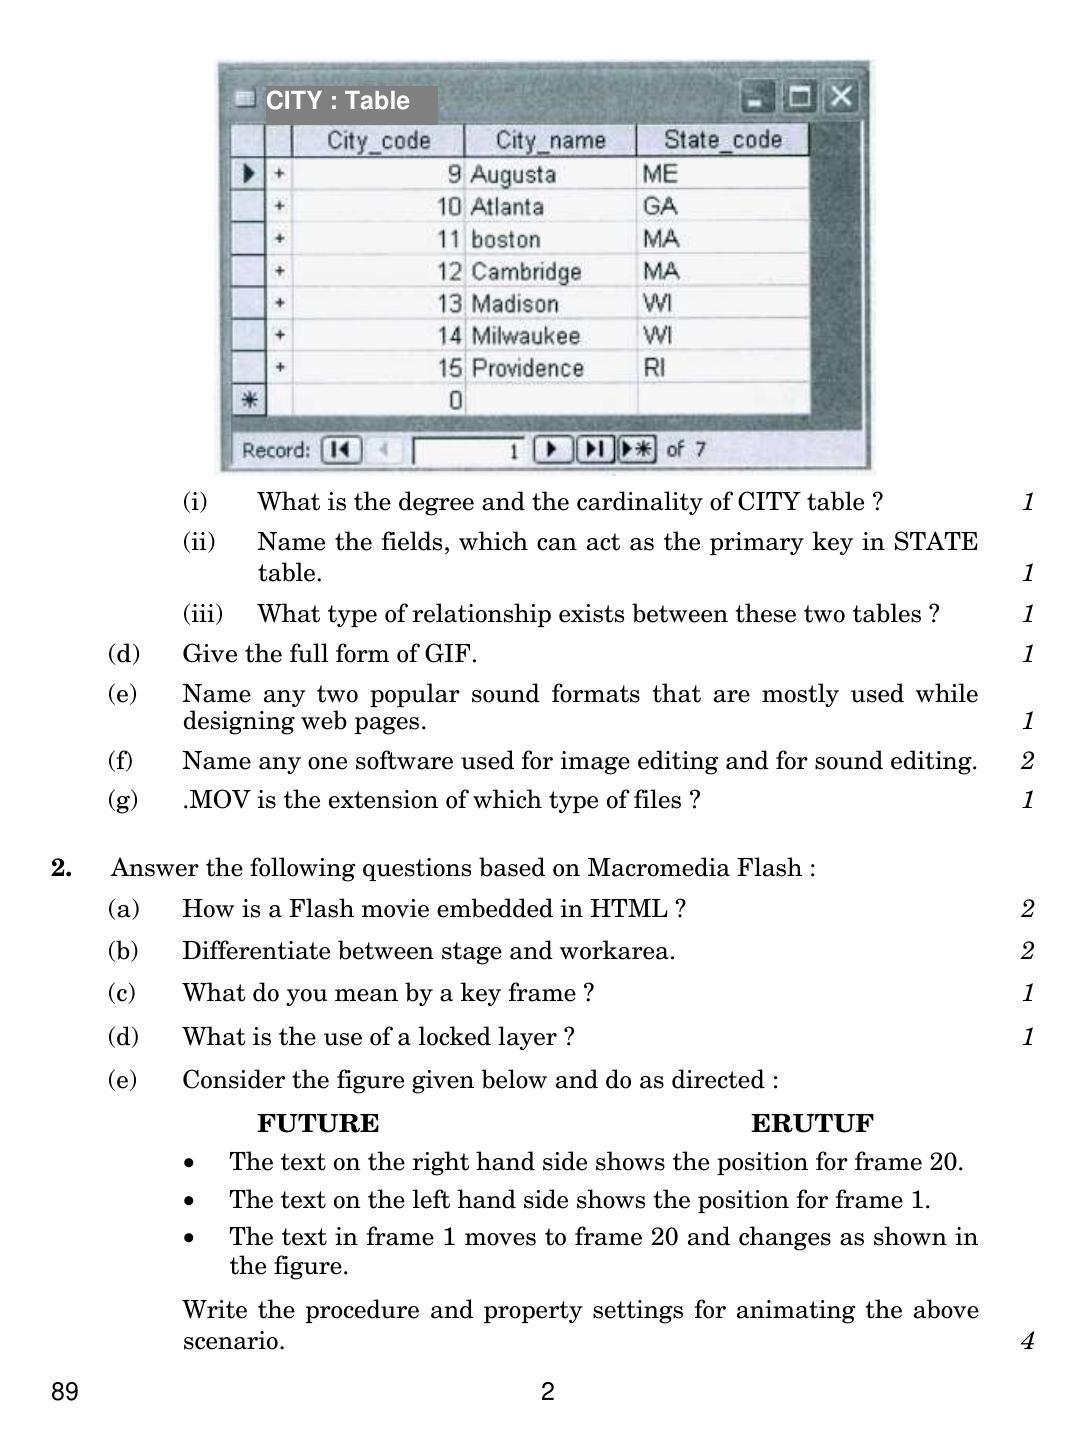 CBSE Class 12 89 MULTIMEDIA AND WEB TECHNOLOGY 2017 Question Paper - Page 2